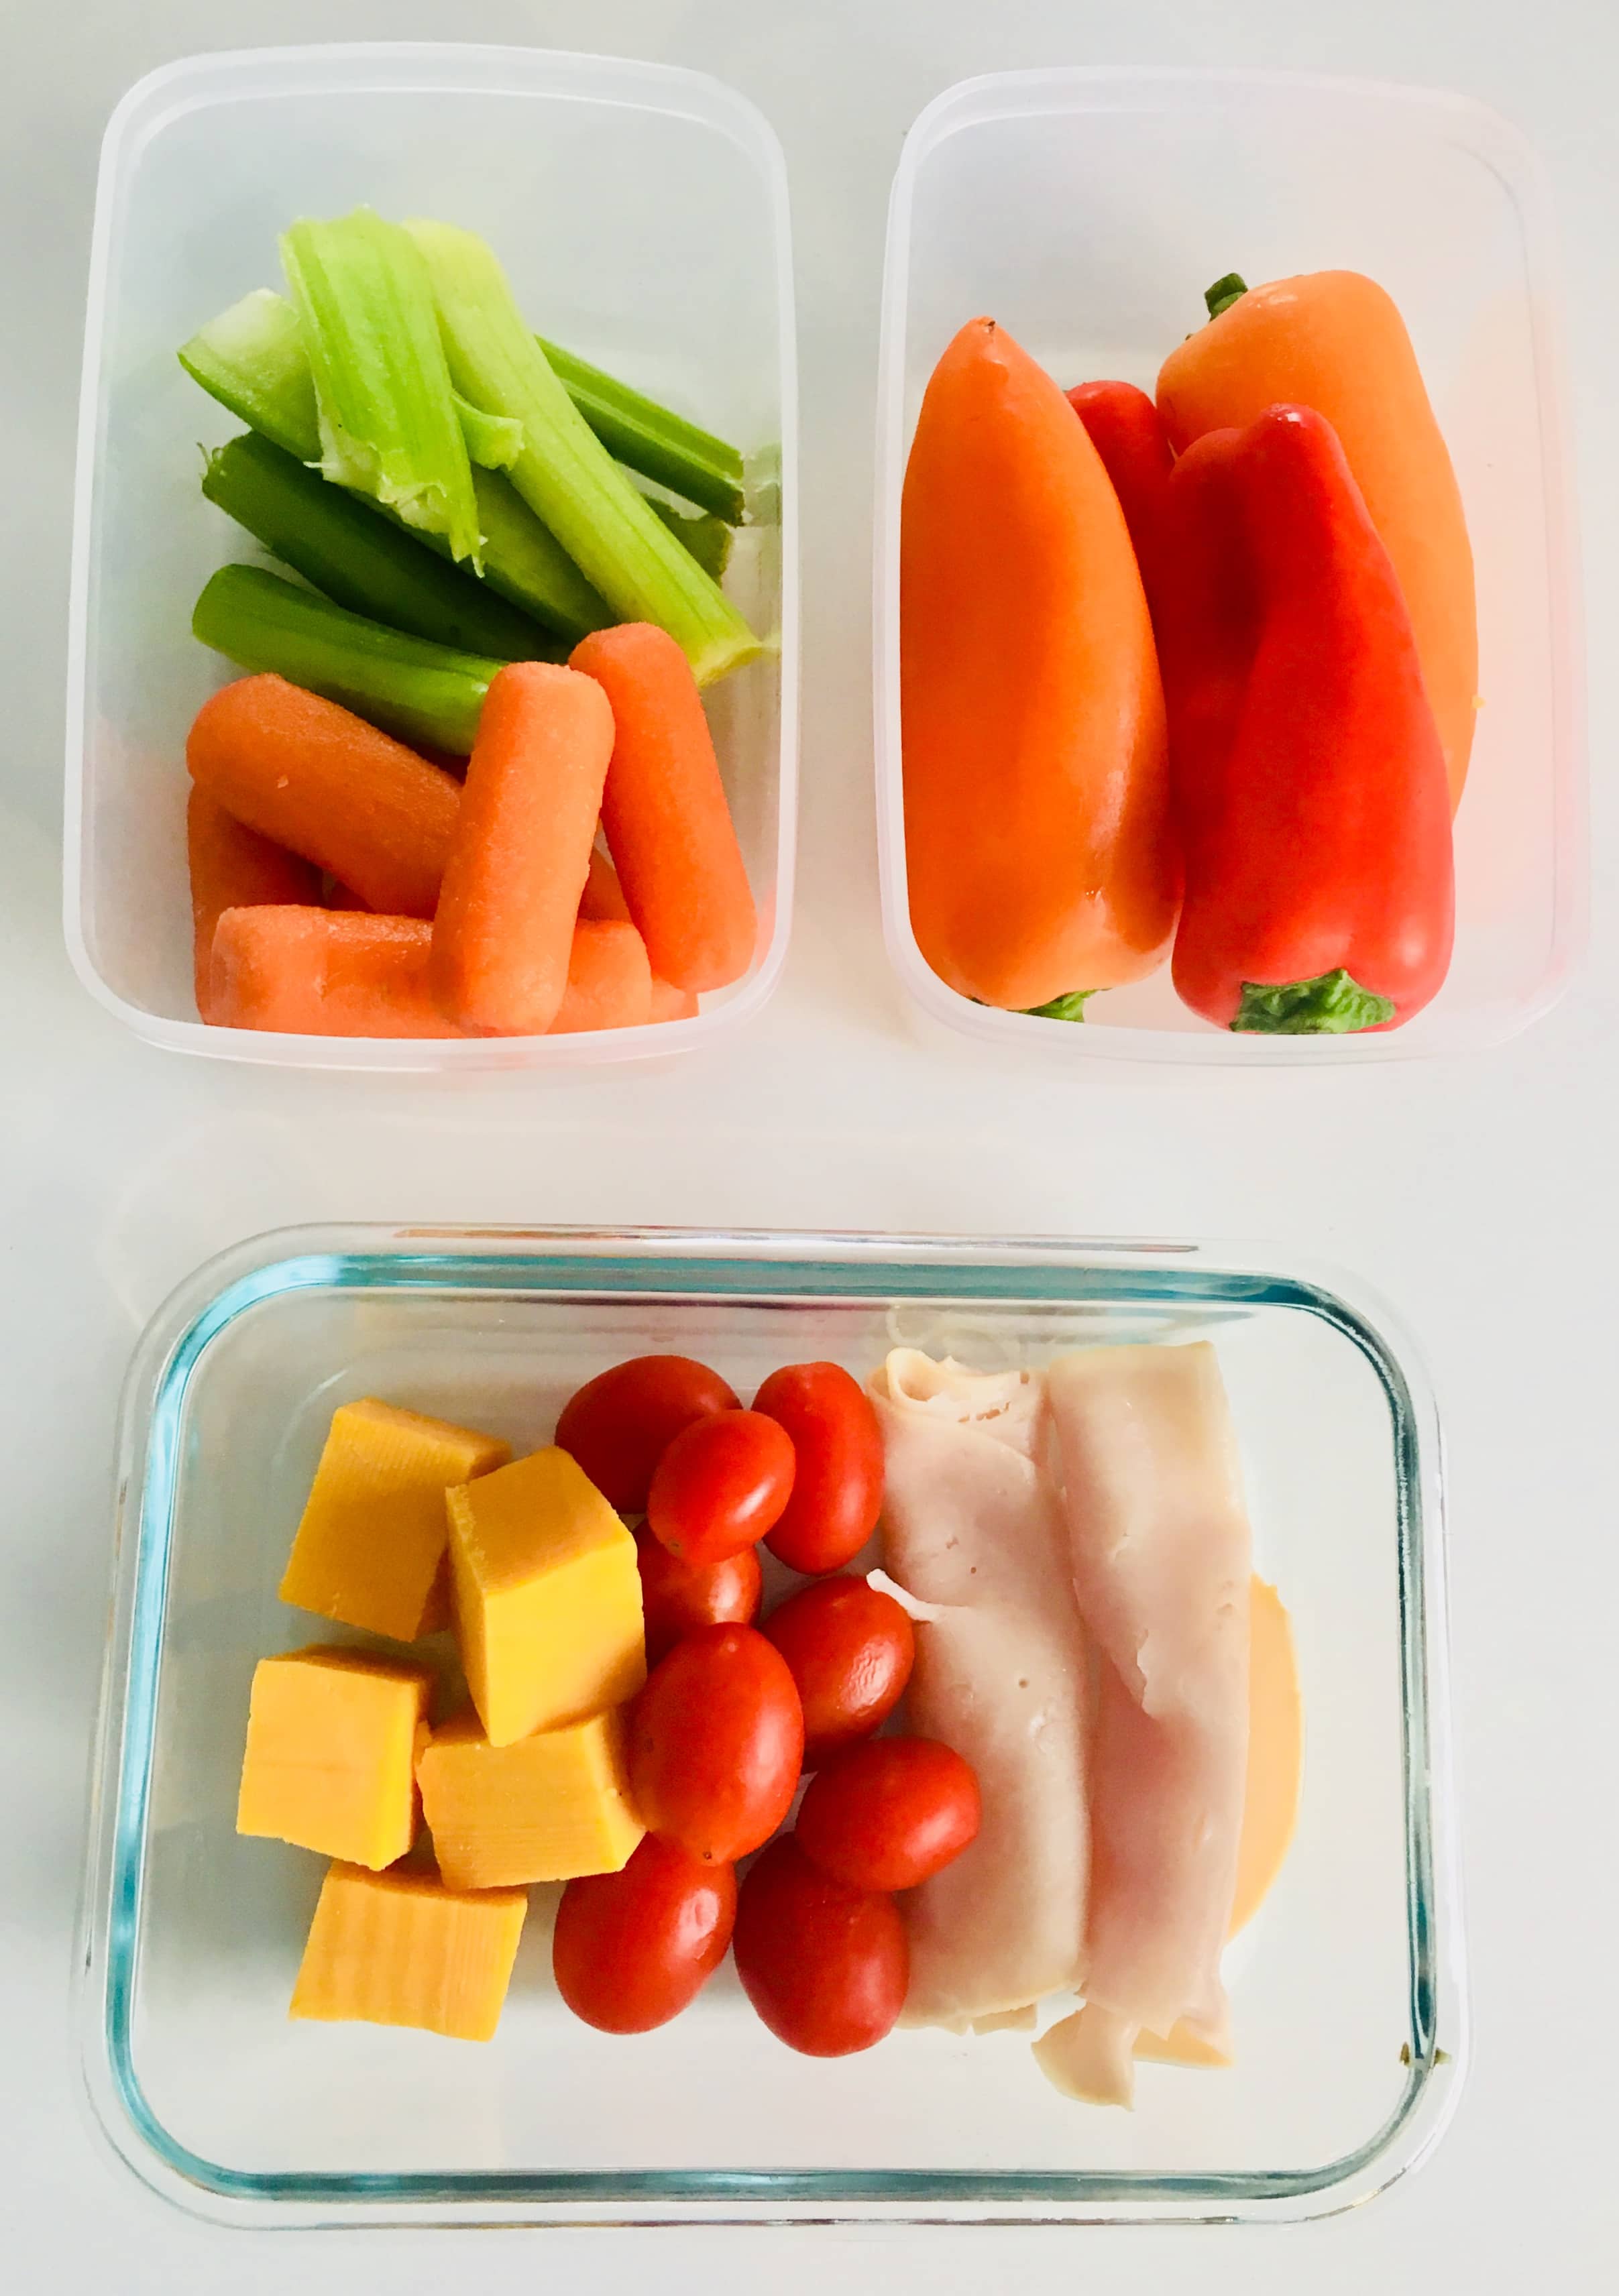 Easy No Cook Healthy Snacks for Meal Prep